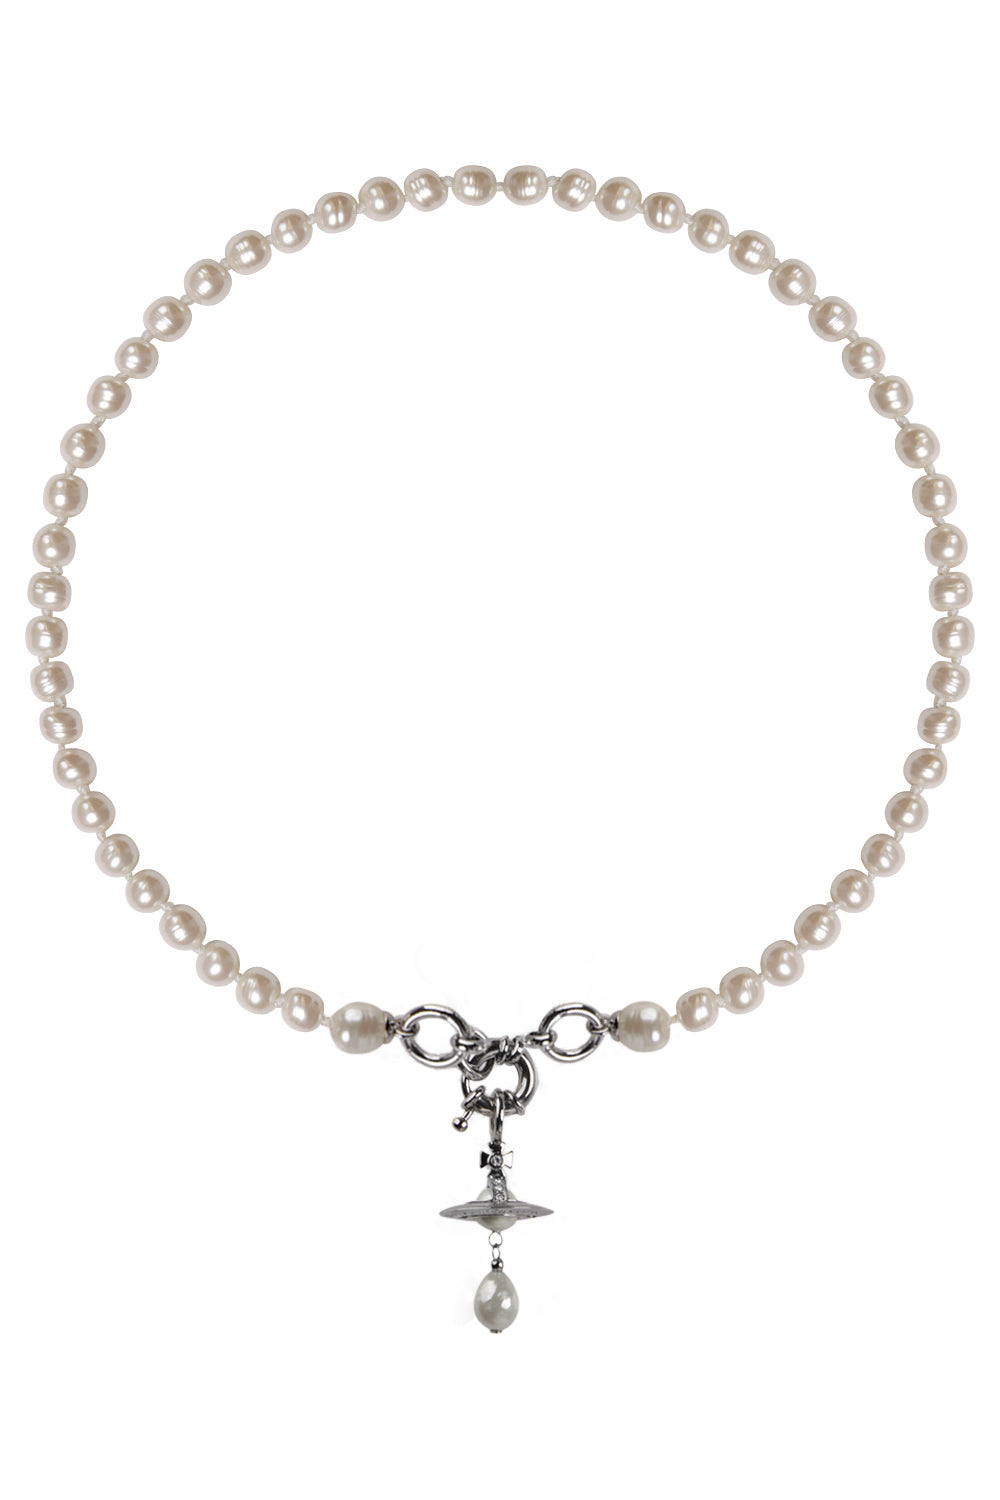 Vivienne Westwood Plate Necklace Yellow,Silver | PLAYFUL